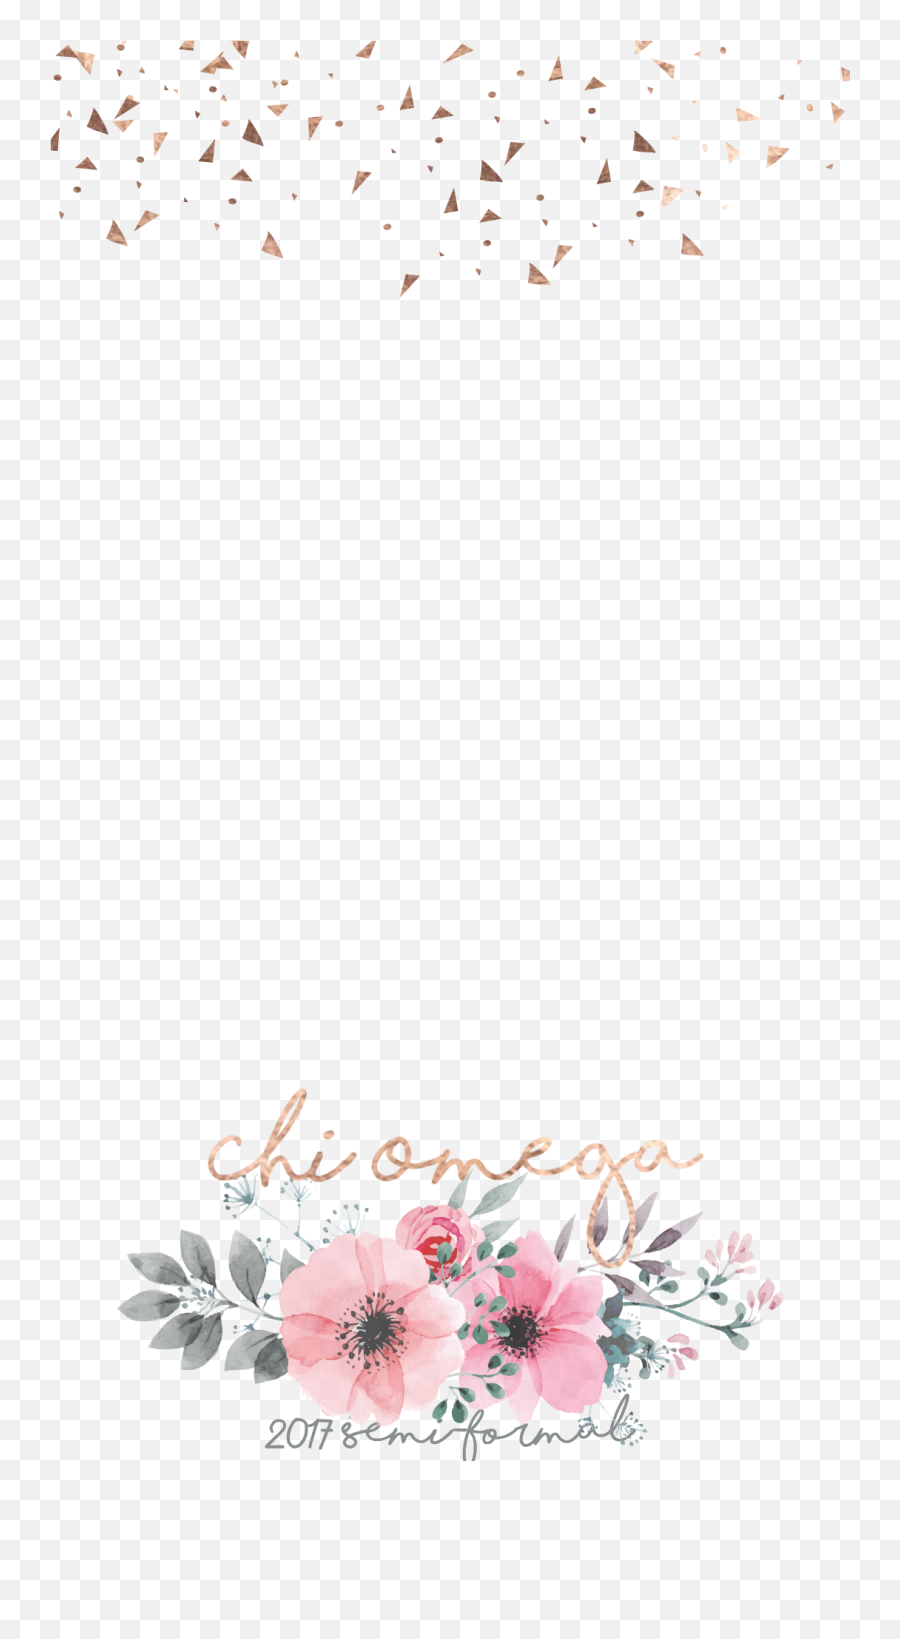 Snapchat Filters Clipart Pink Flower - Bird Migration Png,Snapchat Filters Png